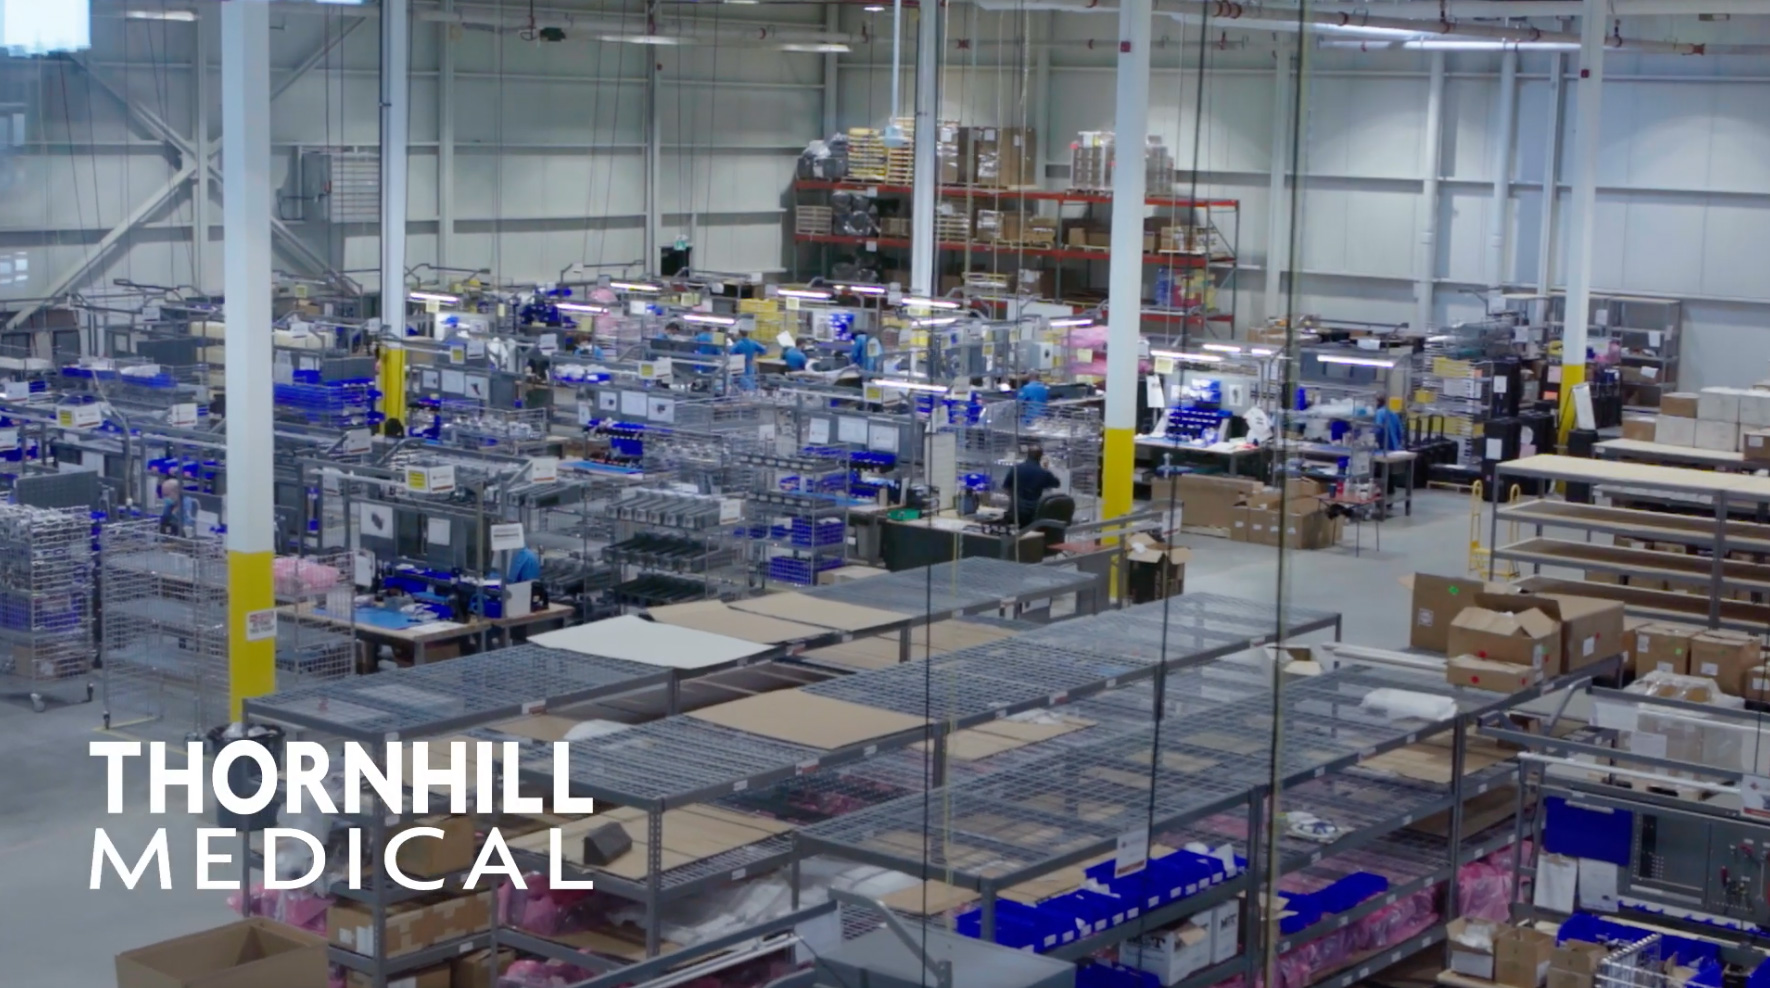 Thornhill Medical manufacturing facility